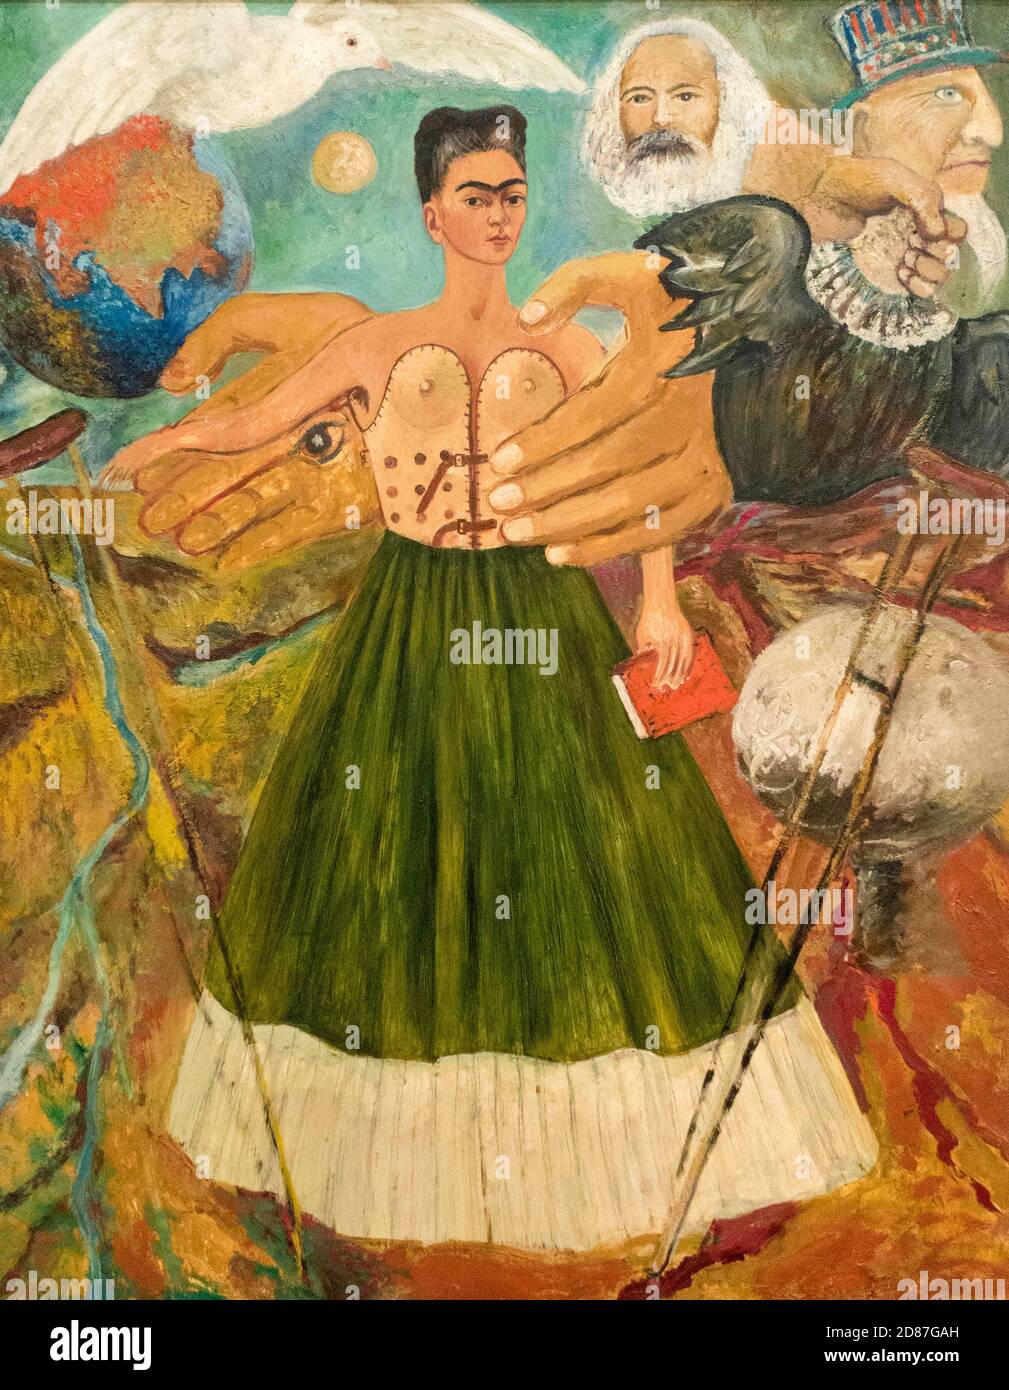 Detail of Marxism will give health to the sick, by Frida Kahlo, 1954 Casa Azul (Blue House) Coyoacan, Mexico City, Mexico Stock Photo